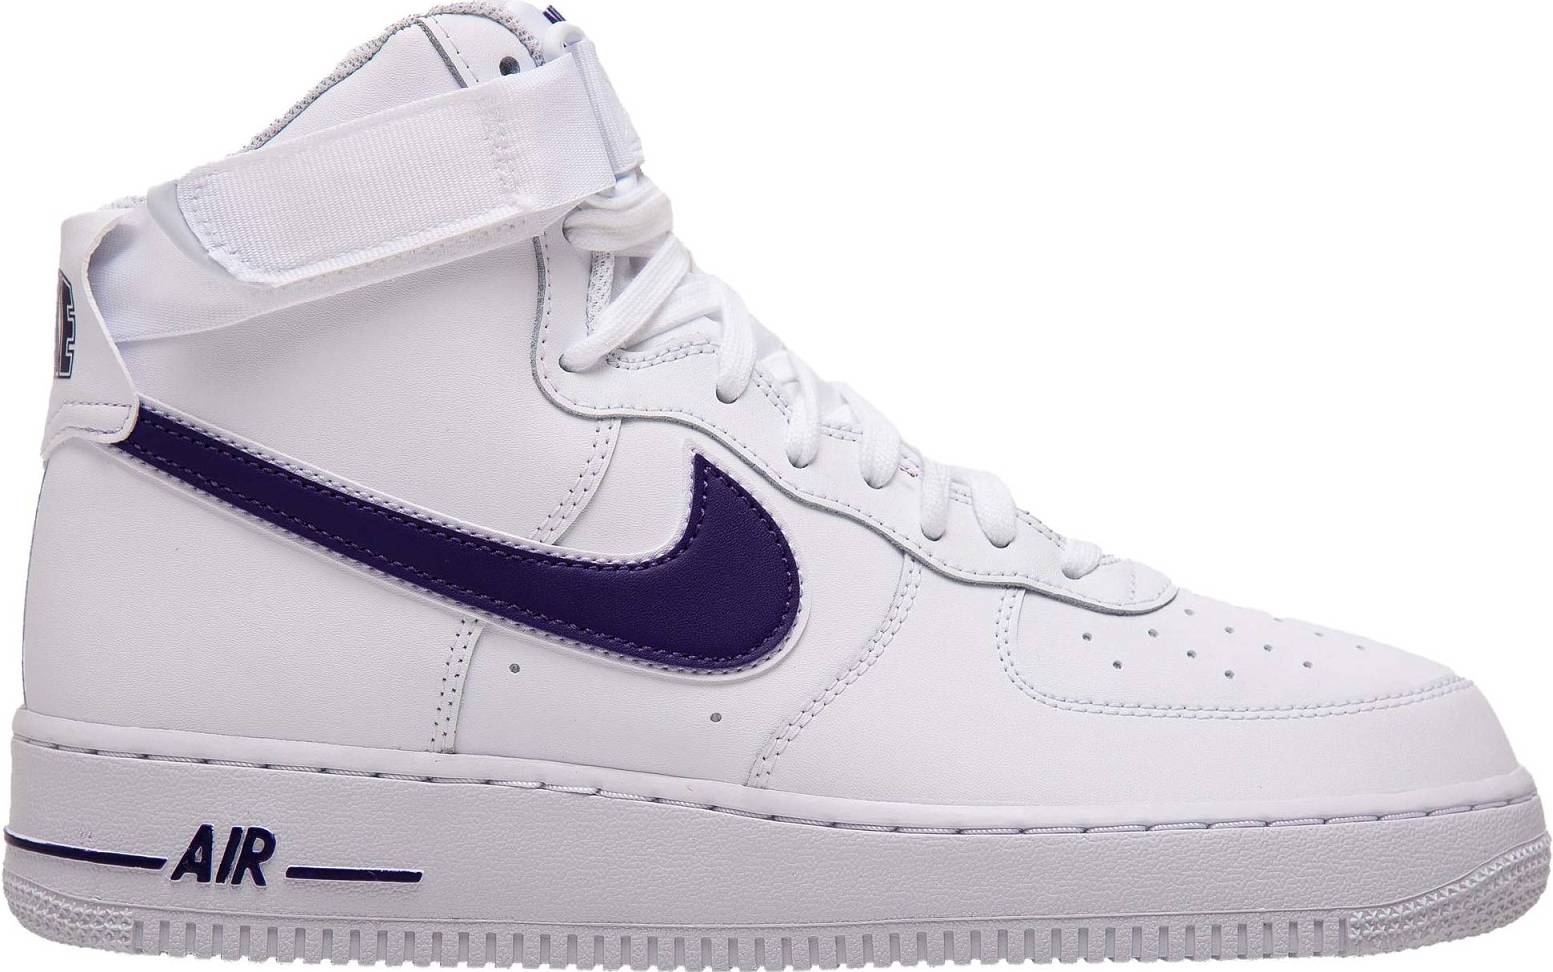 Nike Air Force 1 High 07 3 – Shoes Reviews & Reasons To Buy